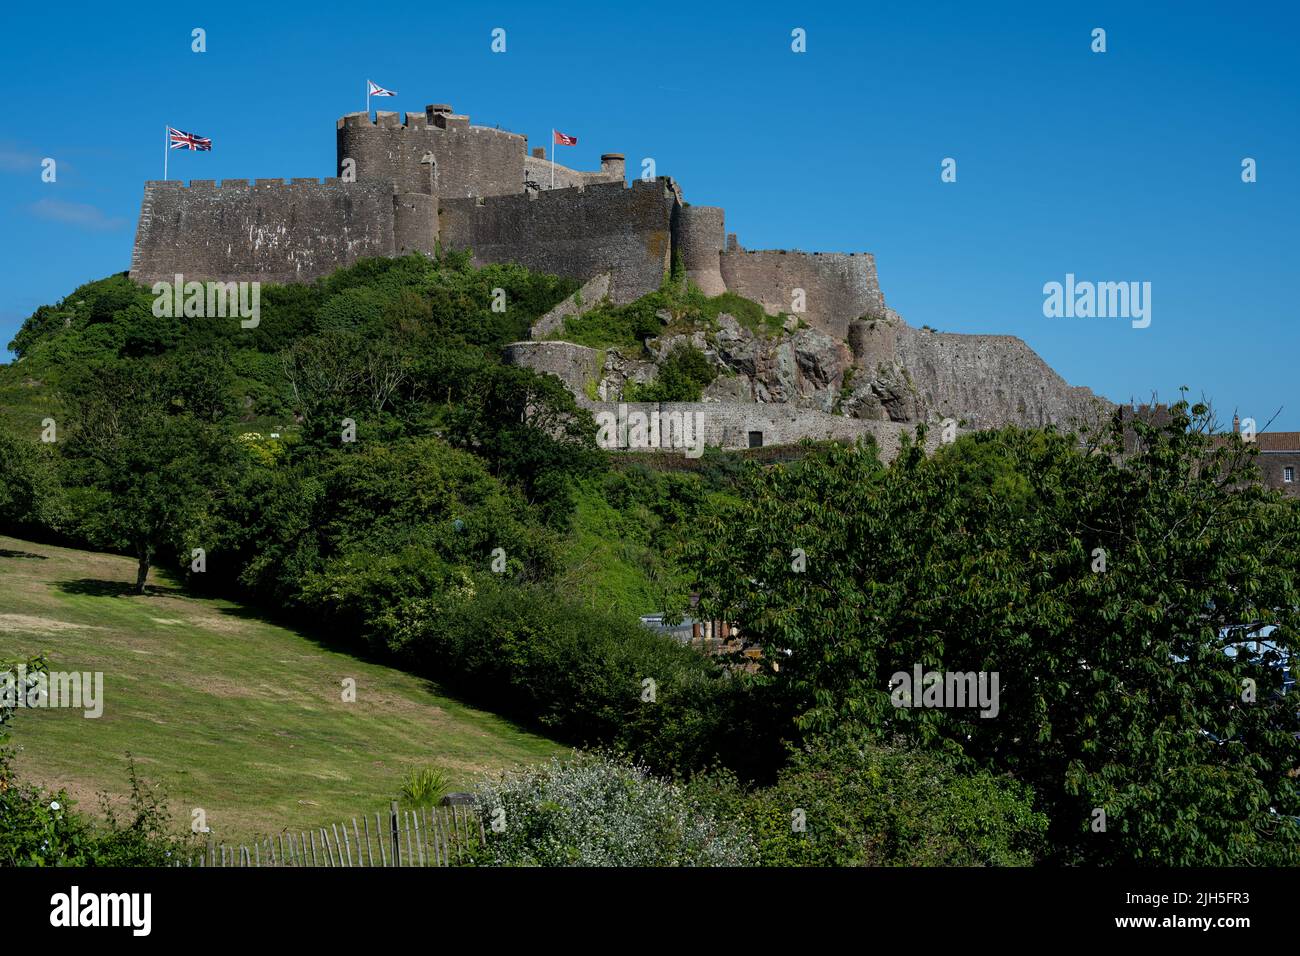 The iconic Mont Orgueil Castle guarding the entrance to Gorey harbour of the British Crown Dependency of Jersey, Channel Islands, British Isles. Stock Photo